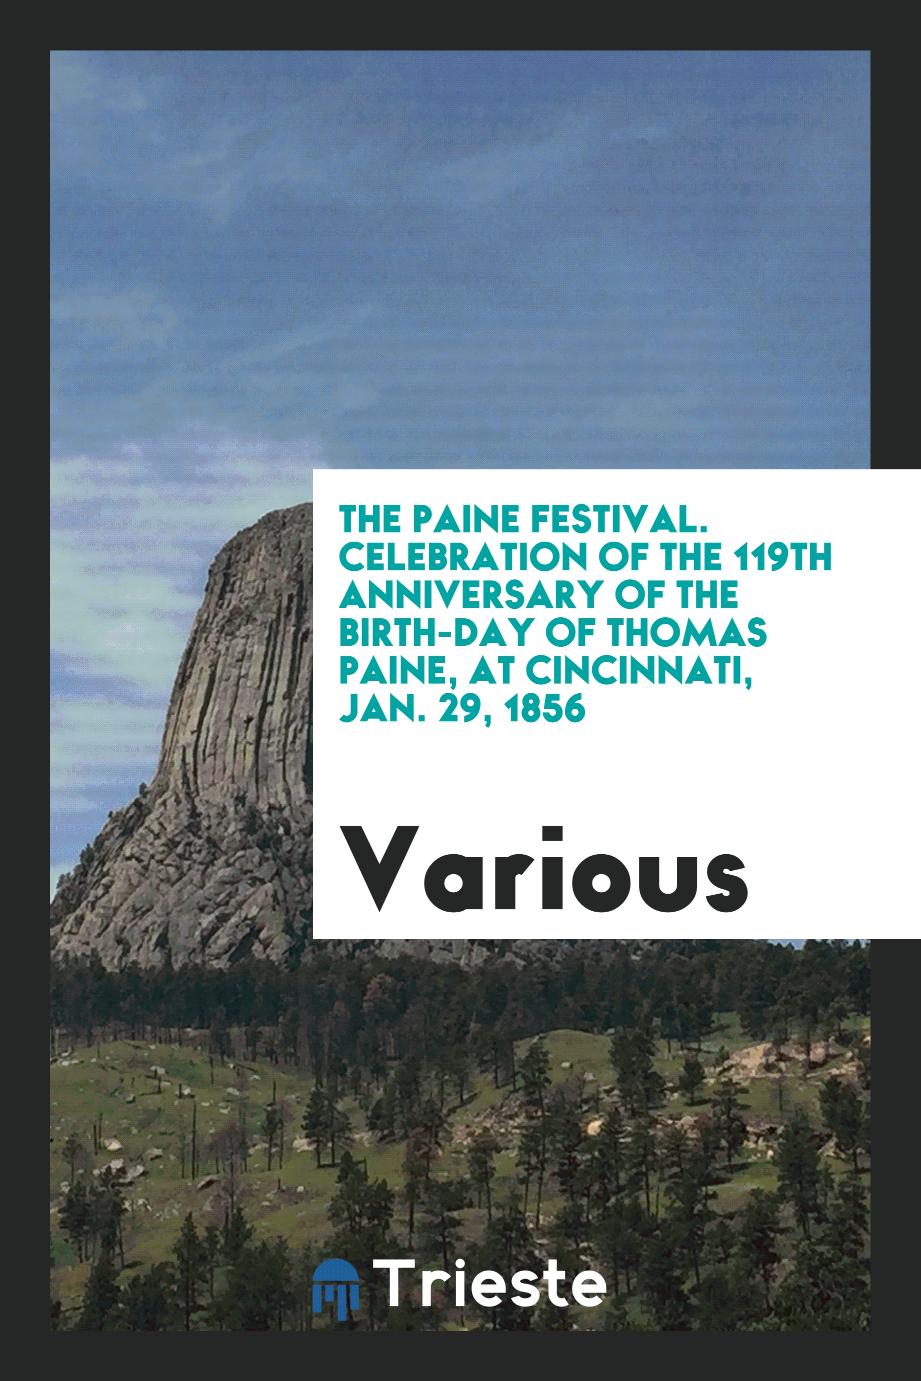 The Paine festival. Celebration of the 119th anniversary of the birth-day of Thomas Paine, at Cincinnati, Jan. 29, 1856